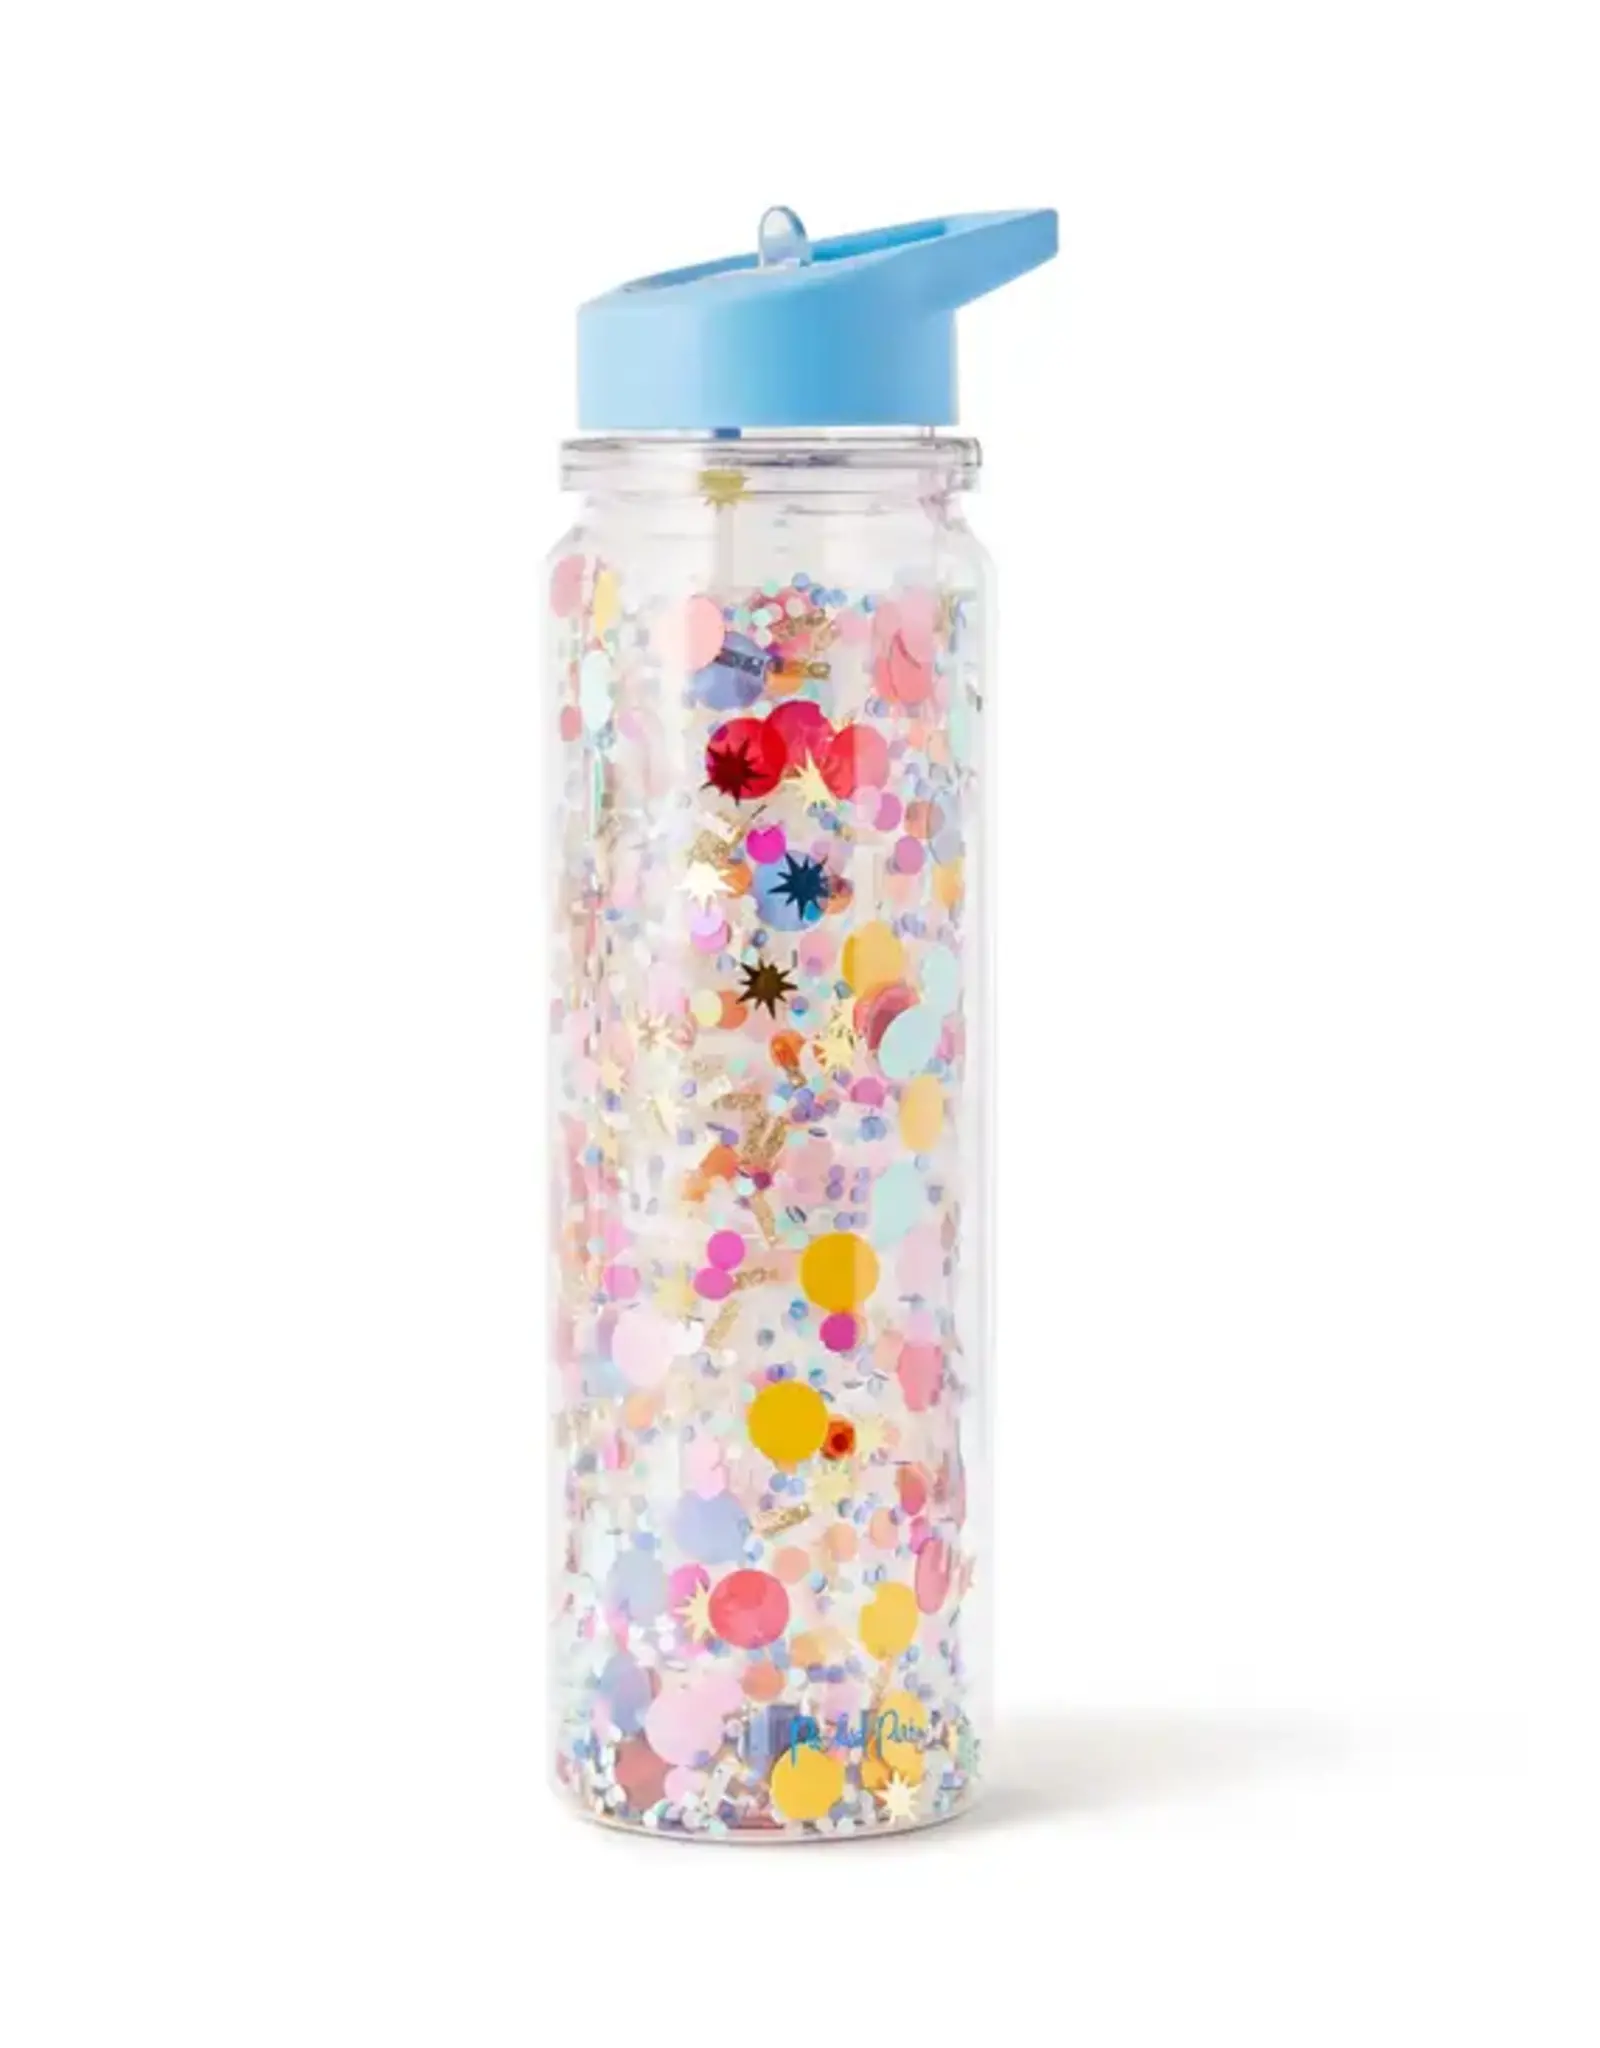 Packed Party Celebrate Confetti Water Bottle with Straw